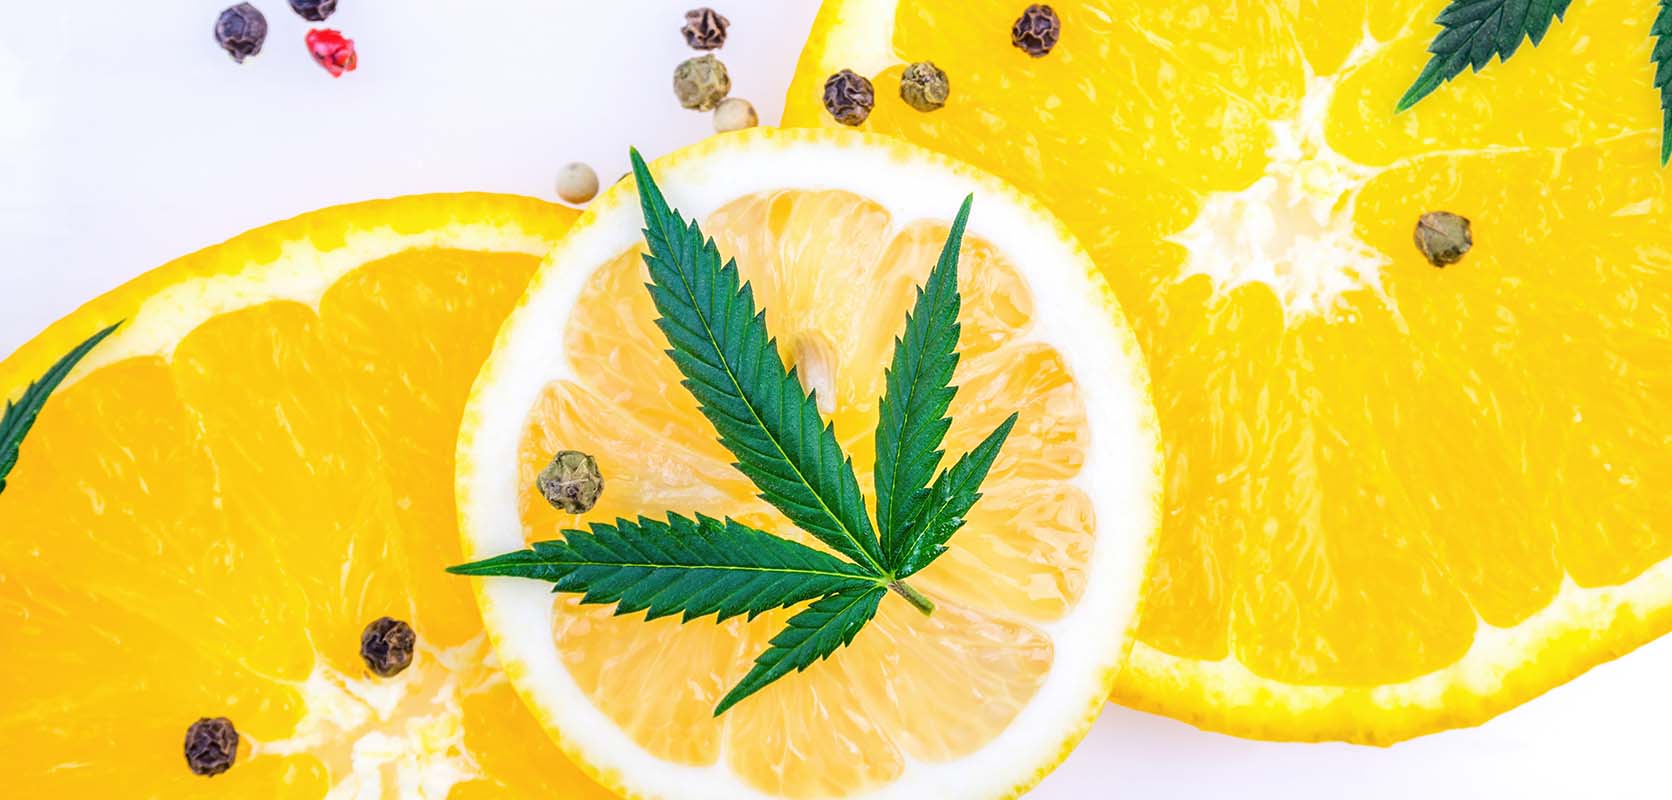 Lemon slices with cannabis leaves. weed dispensary to buy cheapweed online in Canada. Shatter. buy online weeds.